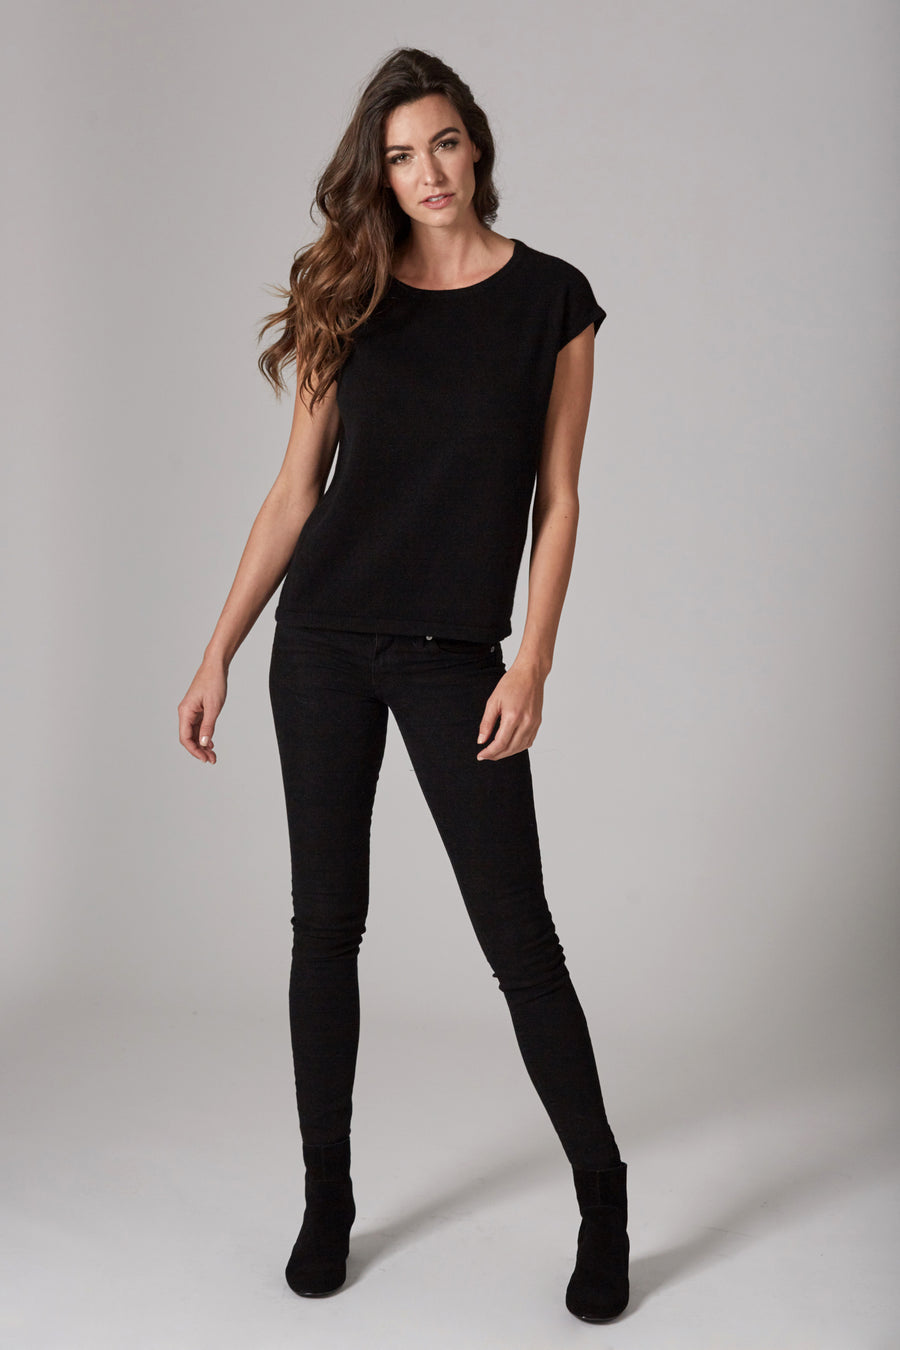 pine cashmere hailey sleeveless women's 100% pure cashmere crewneck top in black